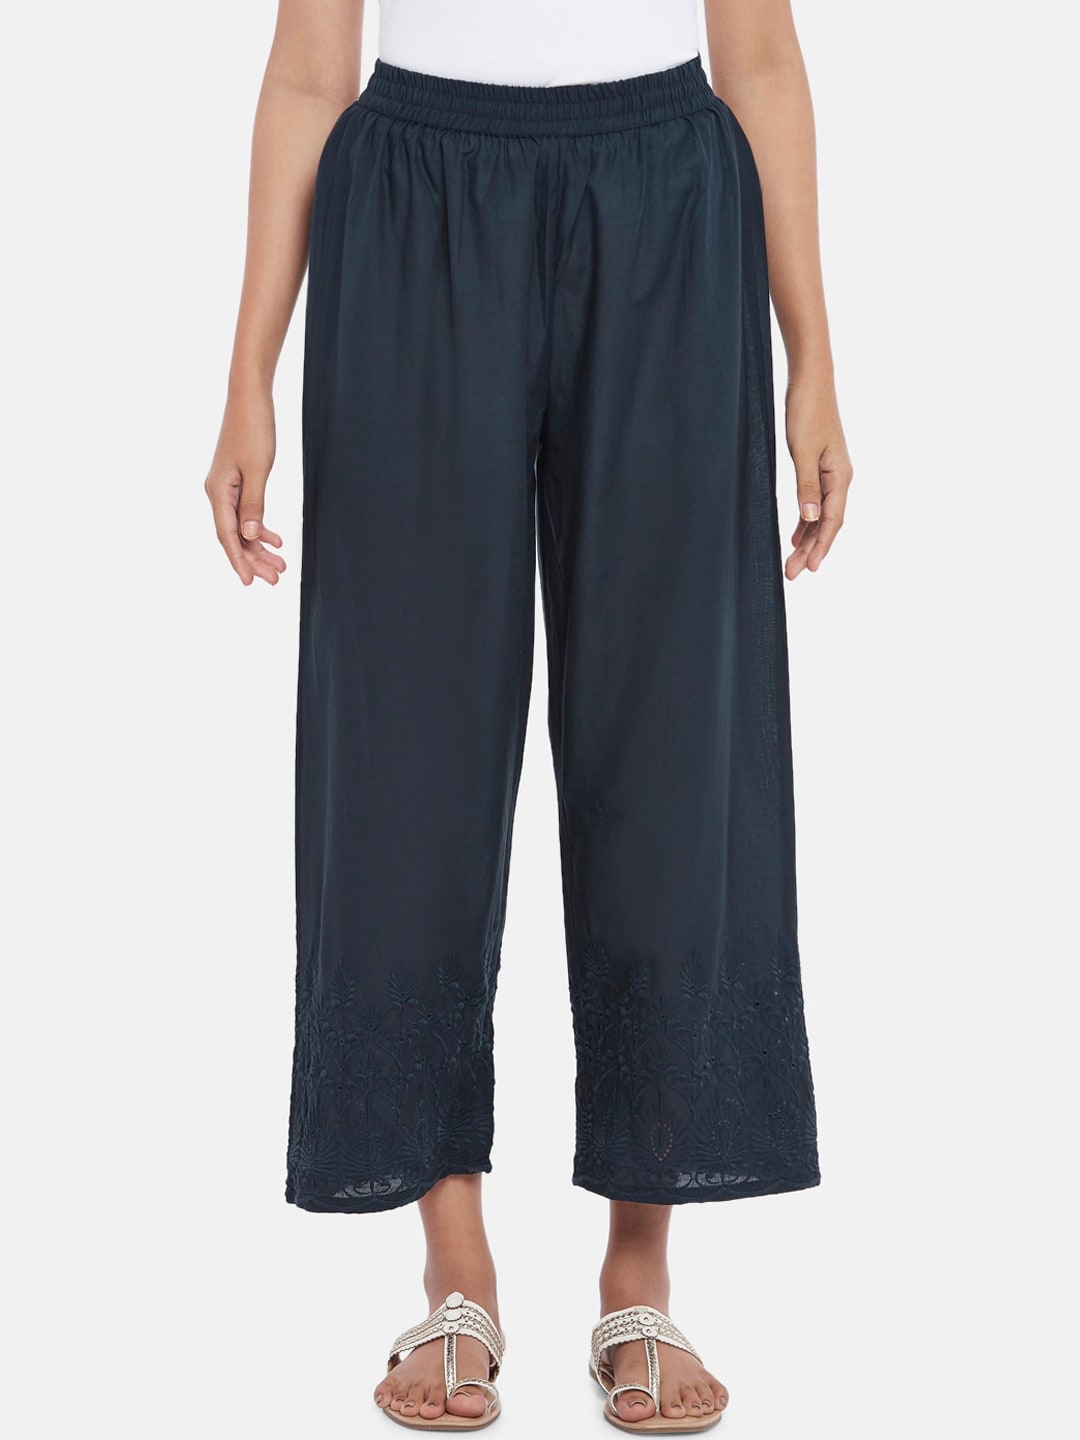 RANGMANCH BY PANTALOONS Women Blue Culottes Trousers Price in India